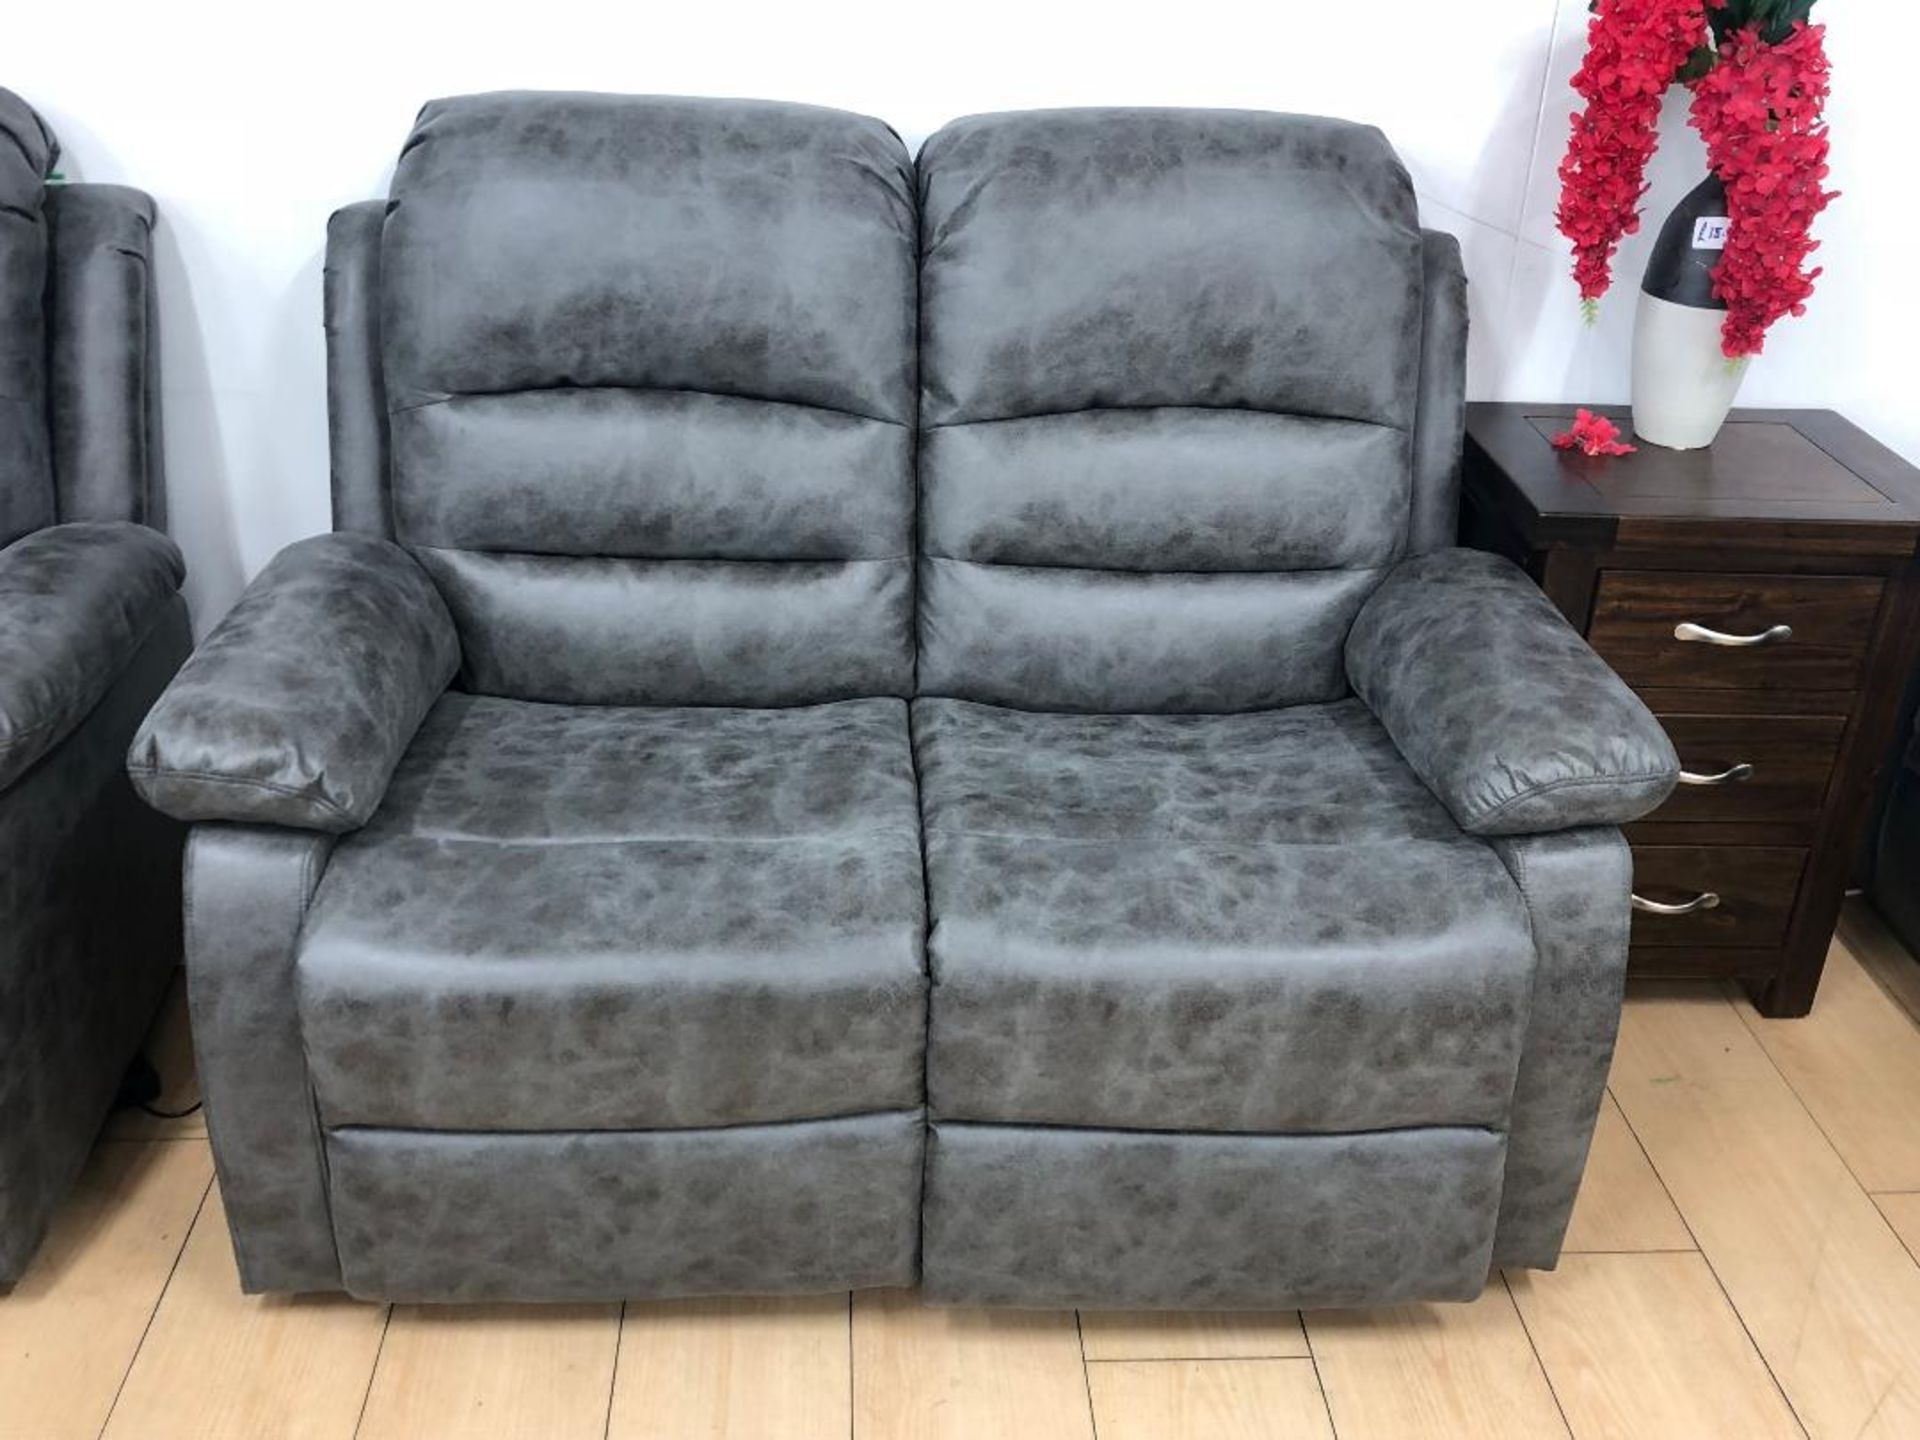 Brand new boxed Cartier 3 seater plus 2 seater plus arm chair in grey plush velvet suede fabric - Image 3 of 4